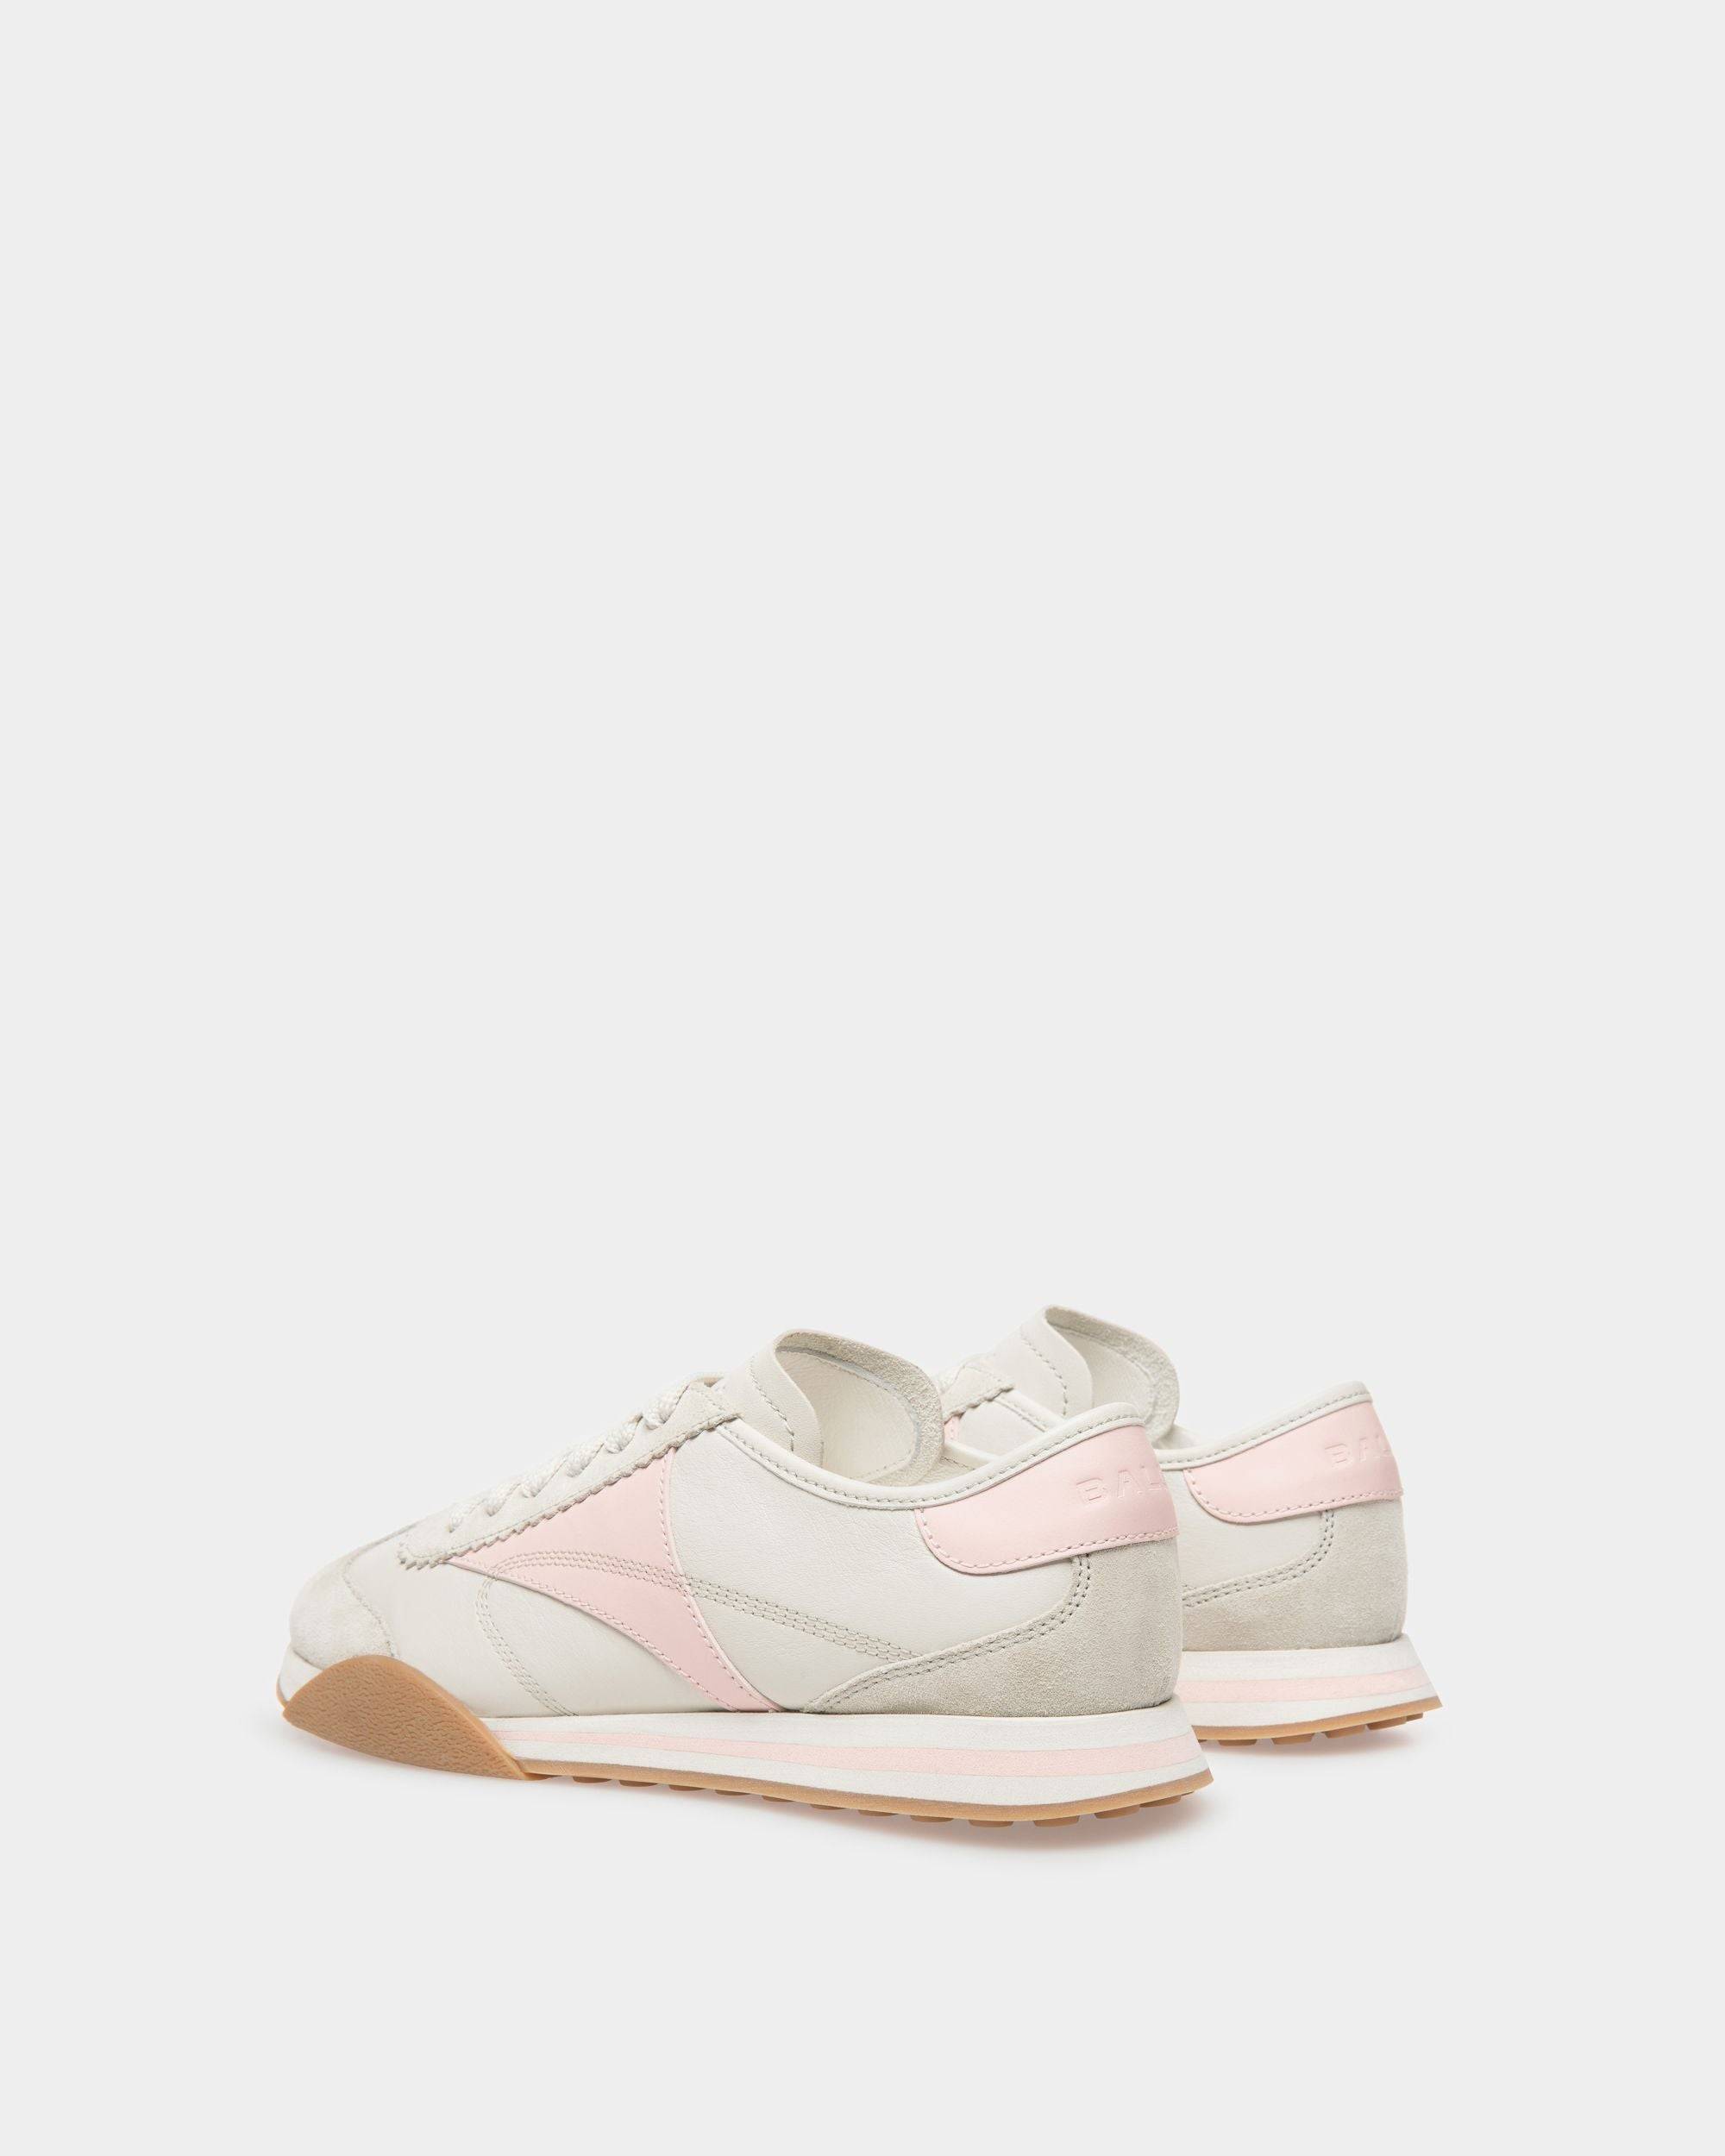 Sonney | Women's Sneakers | Dusty White And Rose Leather | Bally | Still Life 3/4 Back